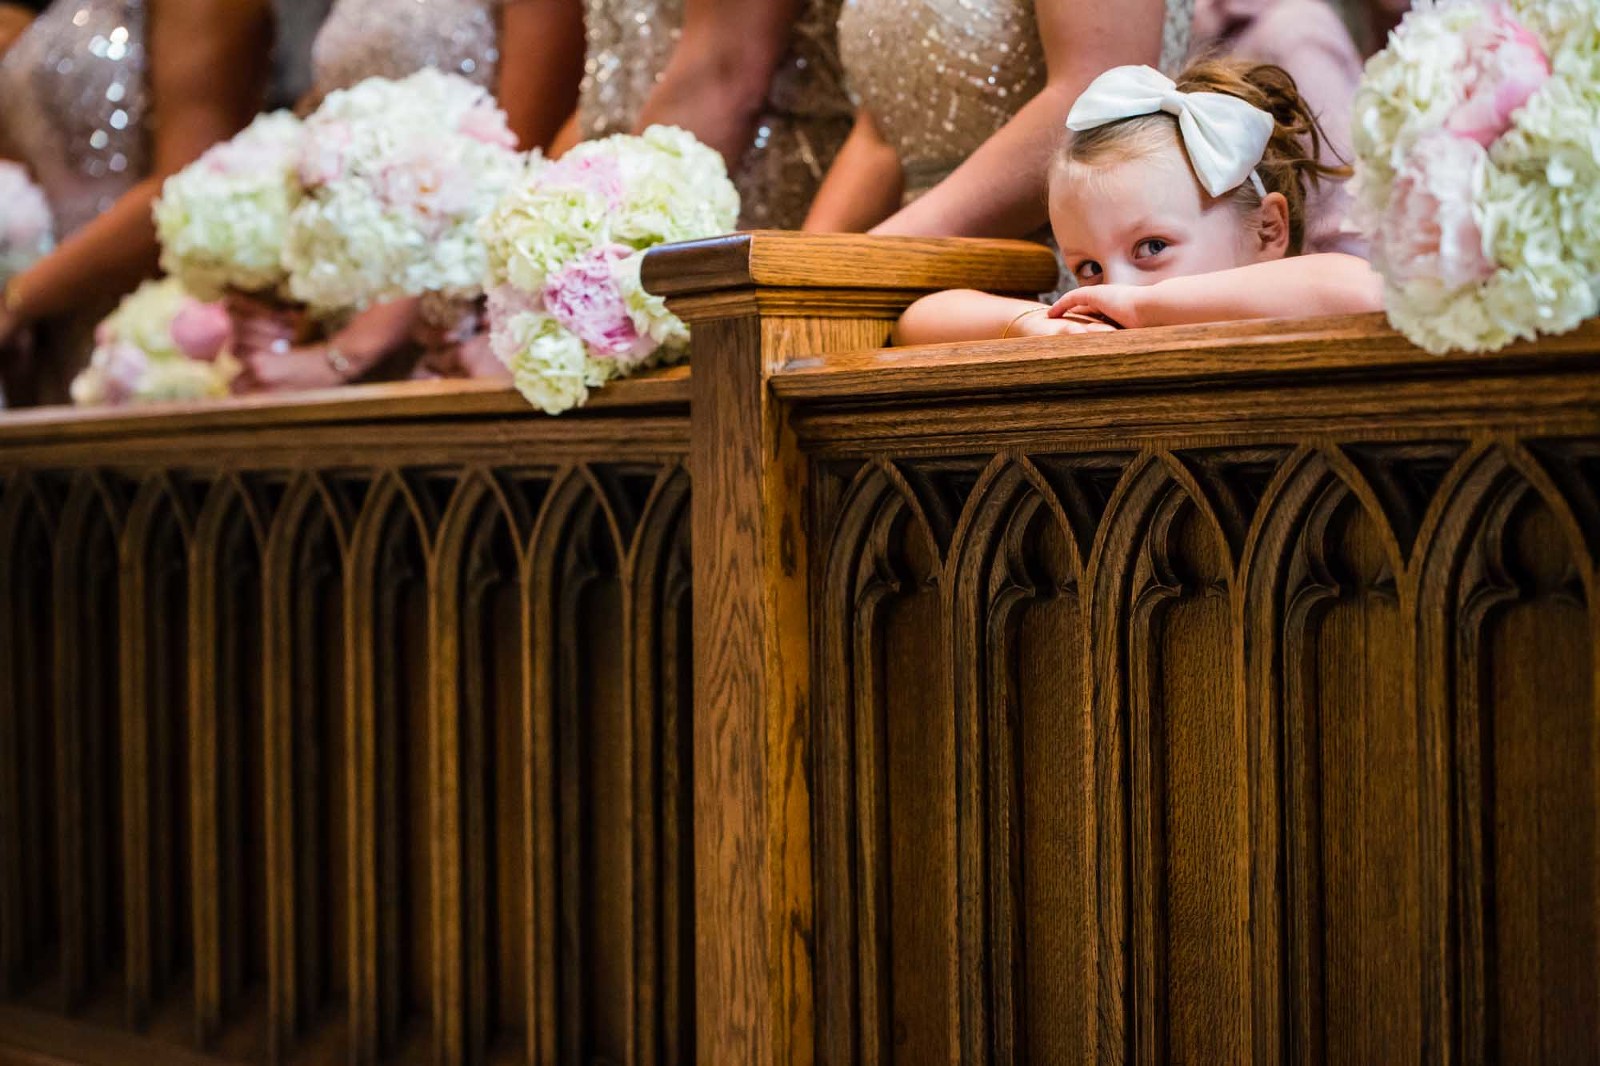 flower girl rests her head on her hands, half asleep during wedding ceremony while surrounded by bridesmaids at church.